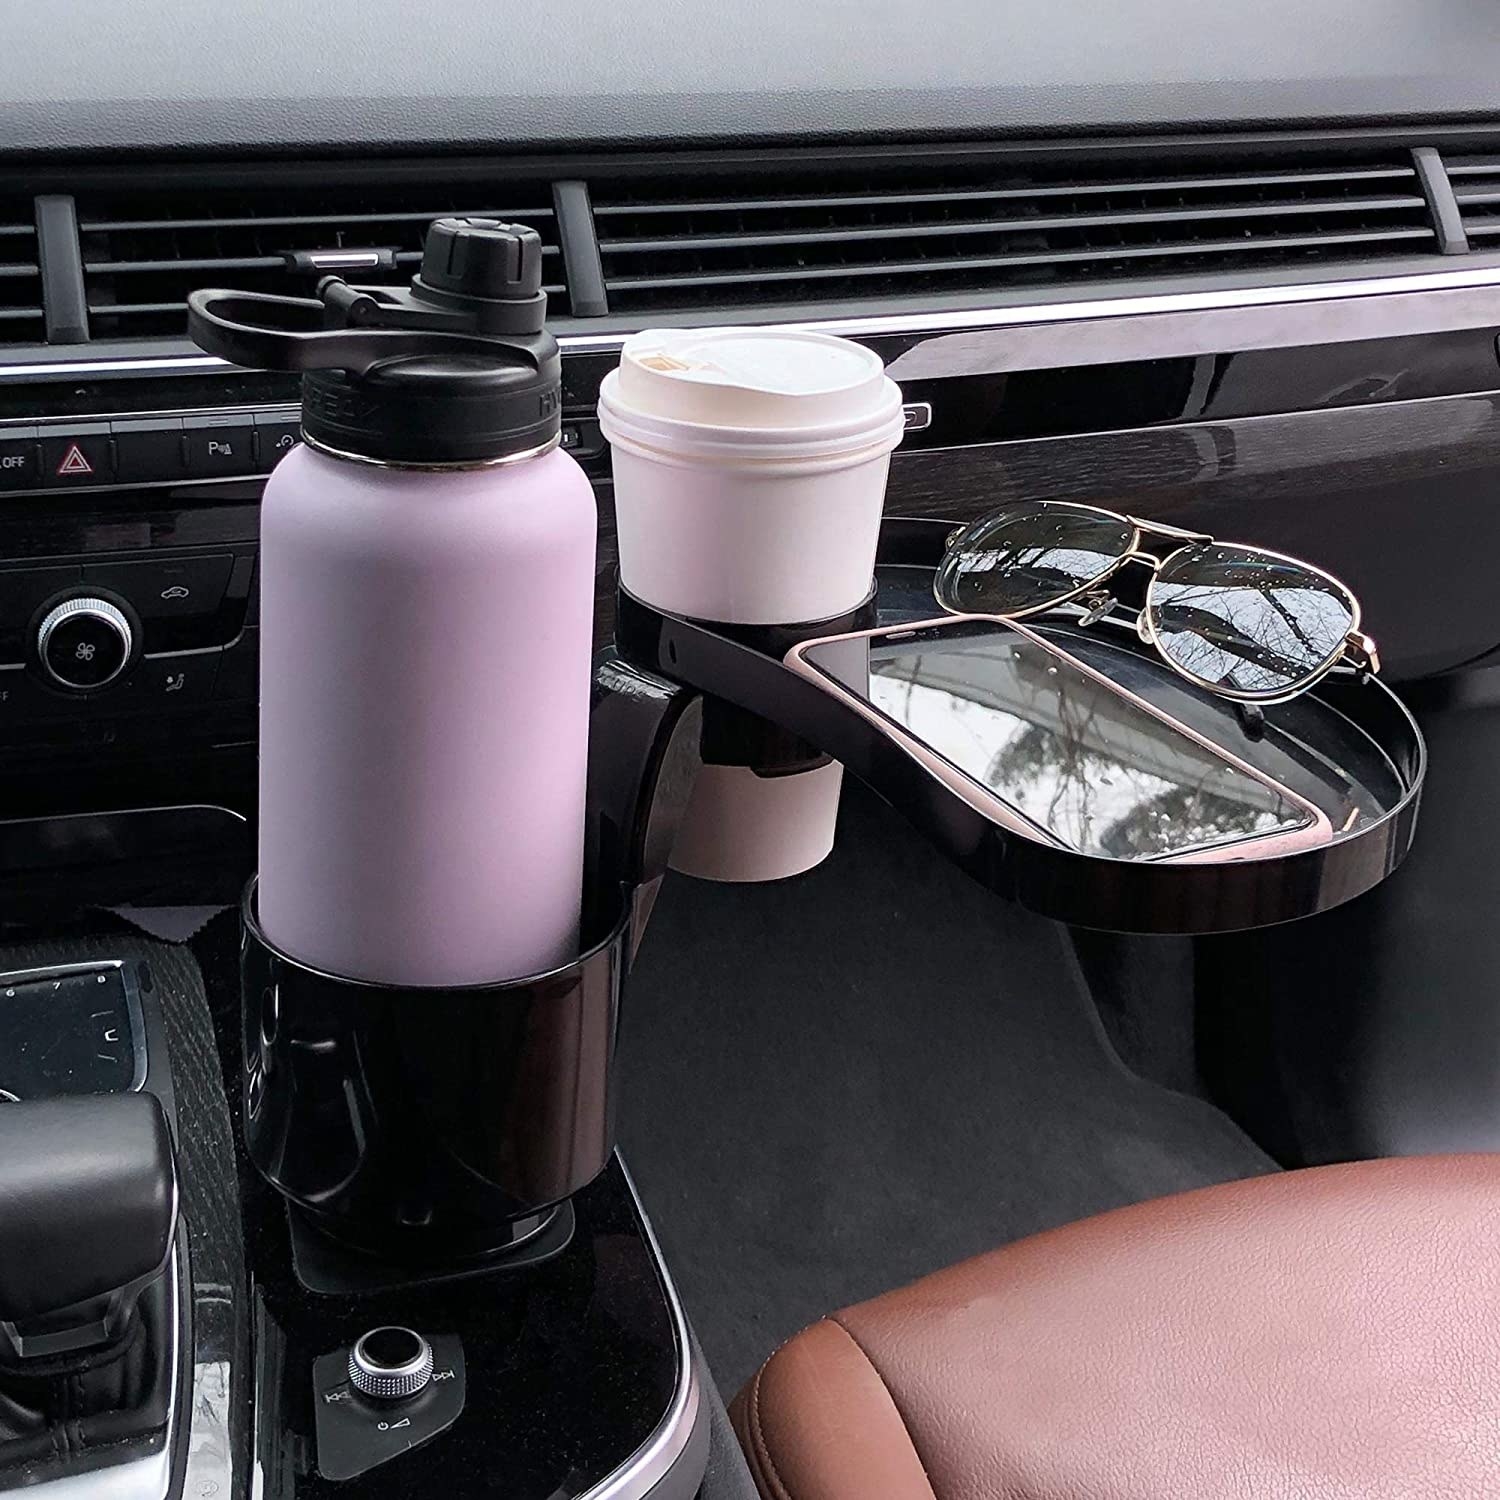 The attachable tray placed in a cup holder inside a car